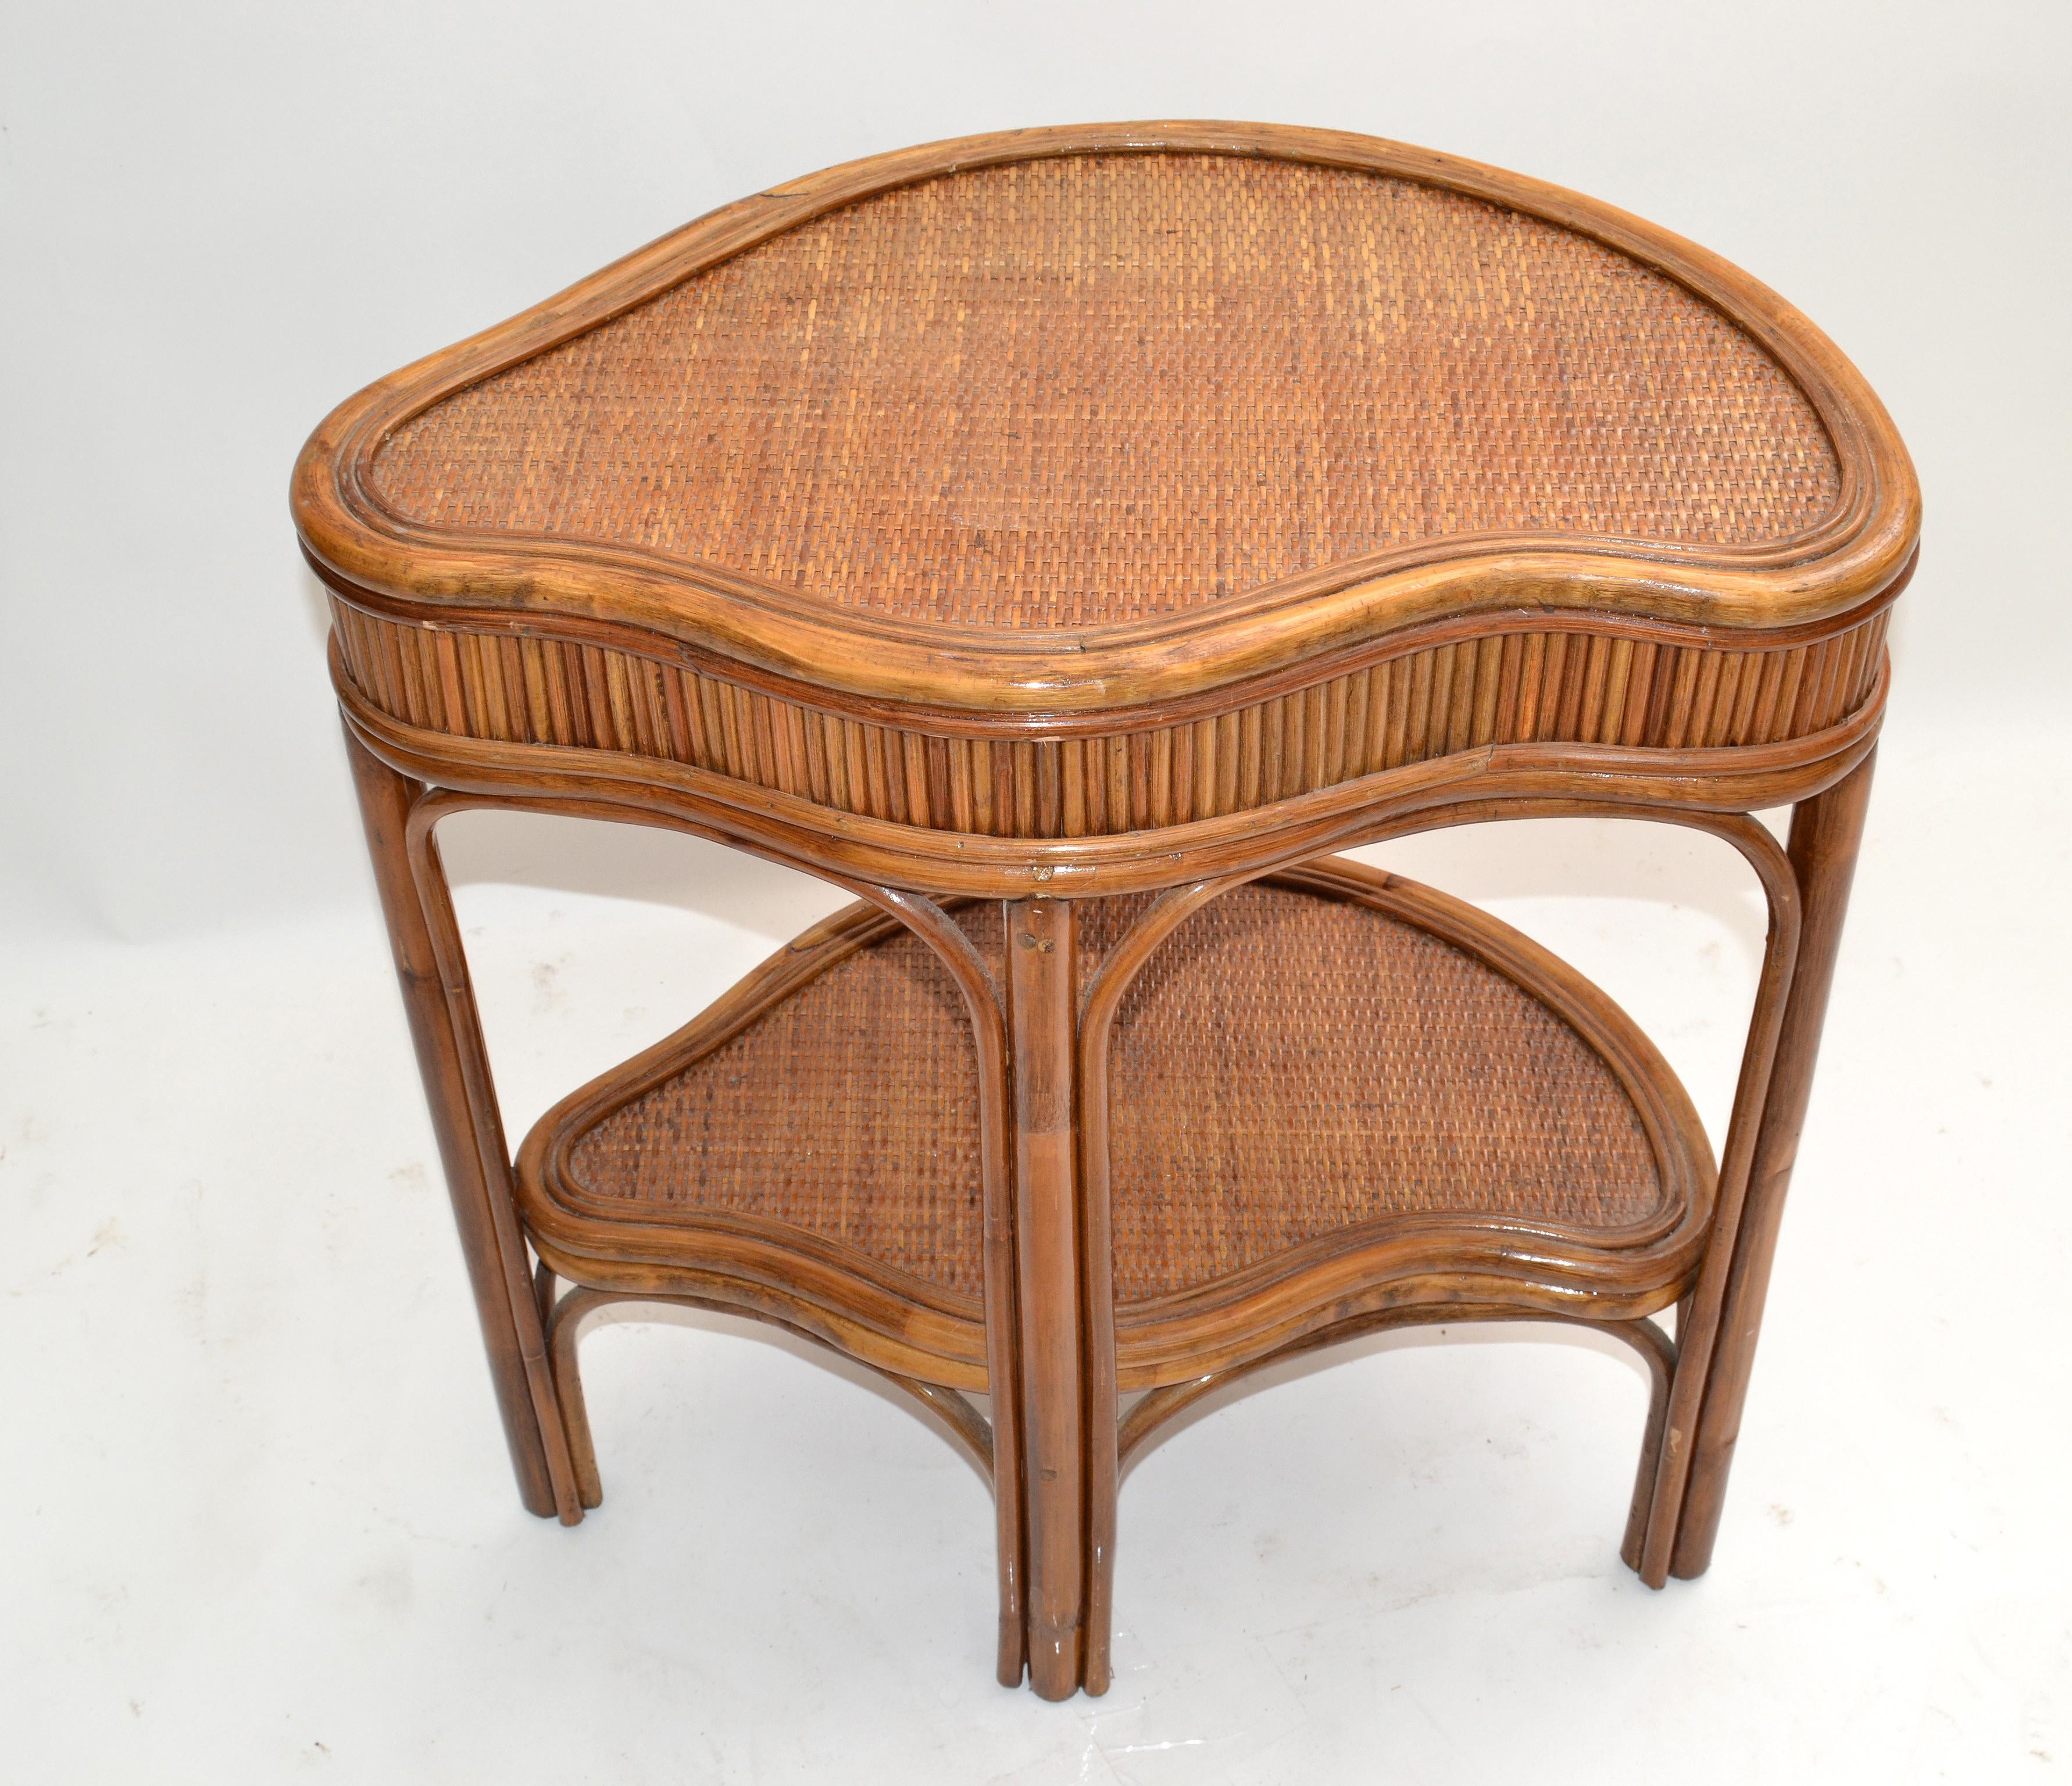 Hand-Crafted Chinoiserie Bamboo & Rattan Handmade Two-Tier Side, End Table Asian Modern 70s For Sale